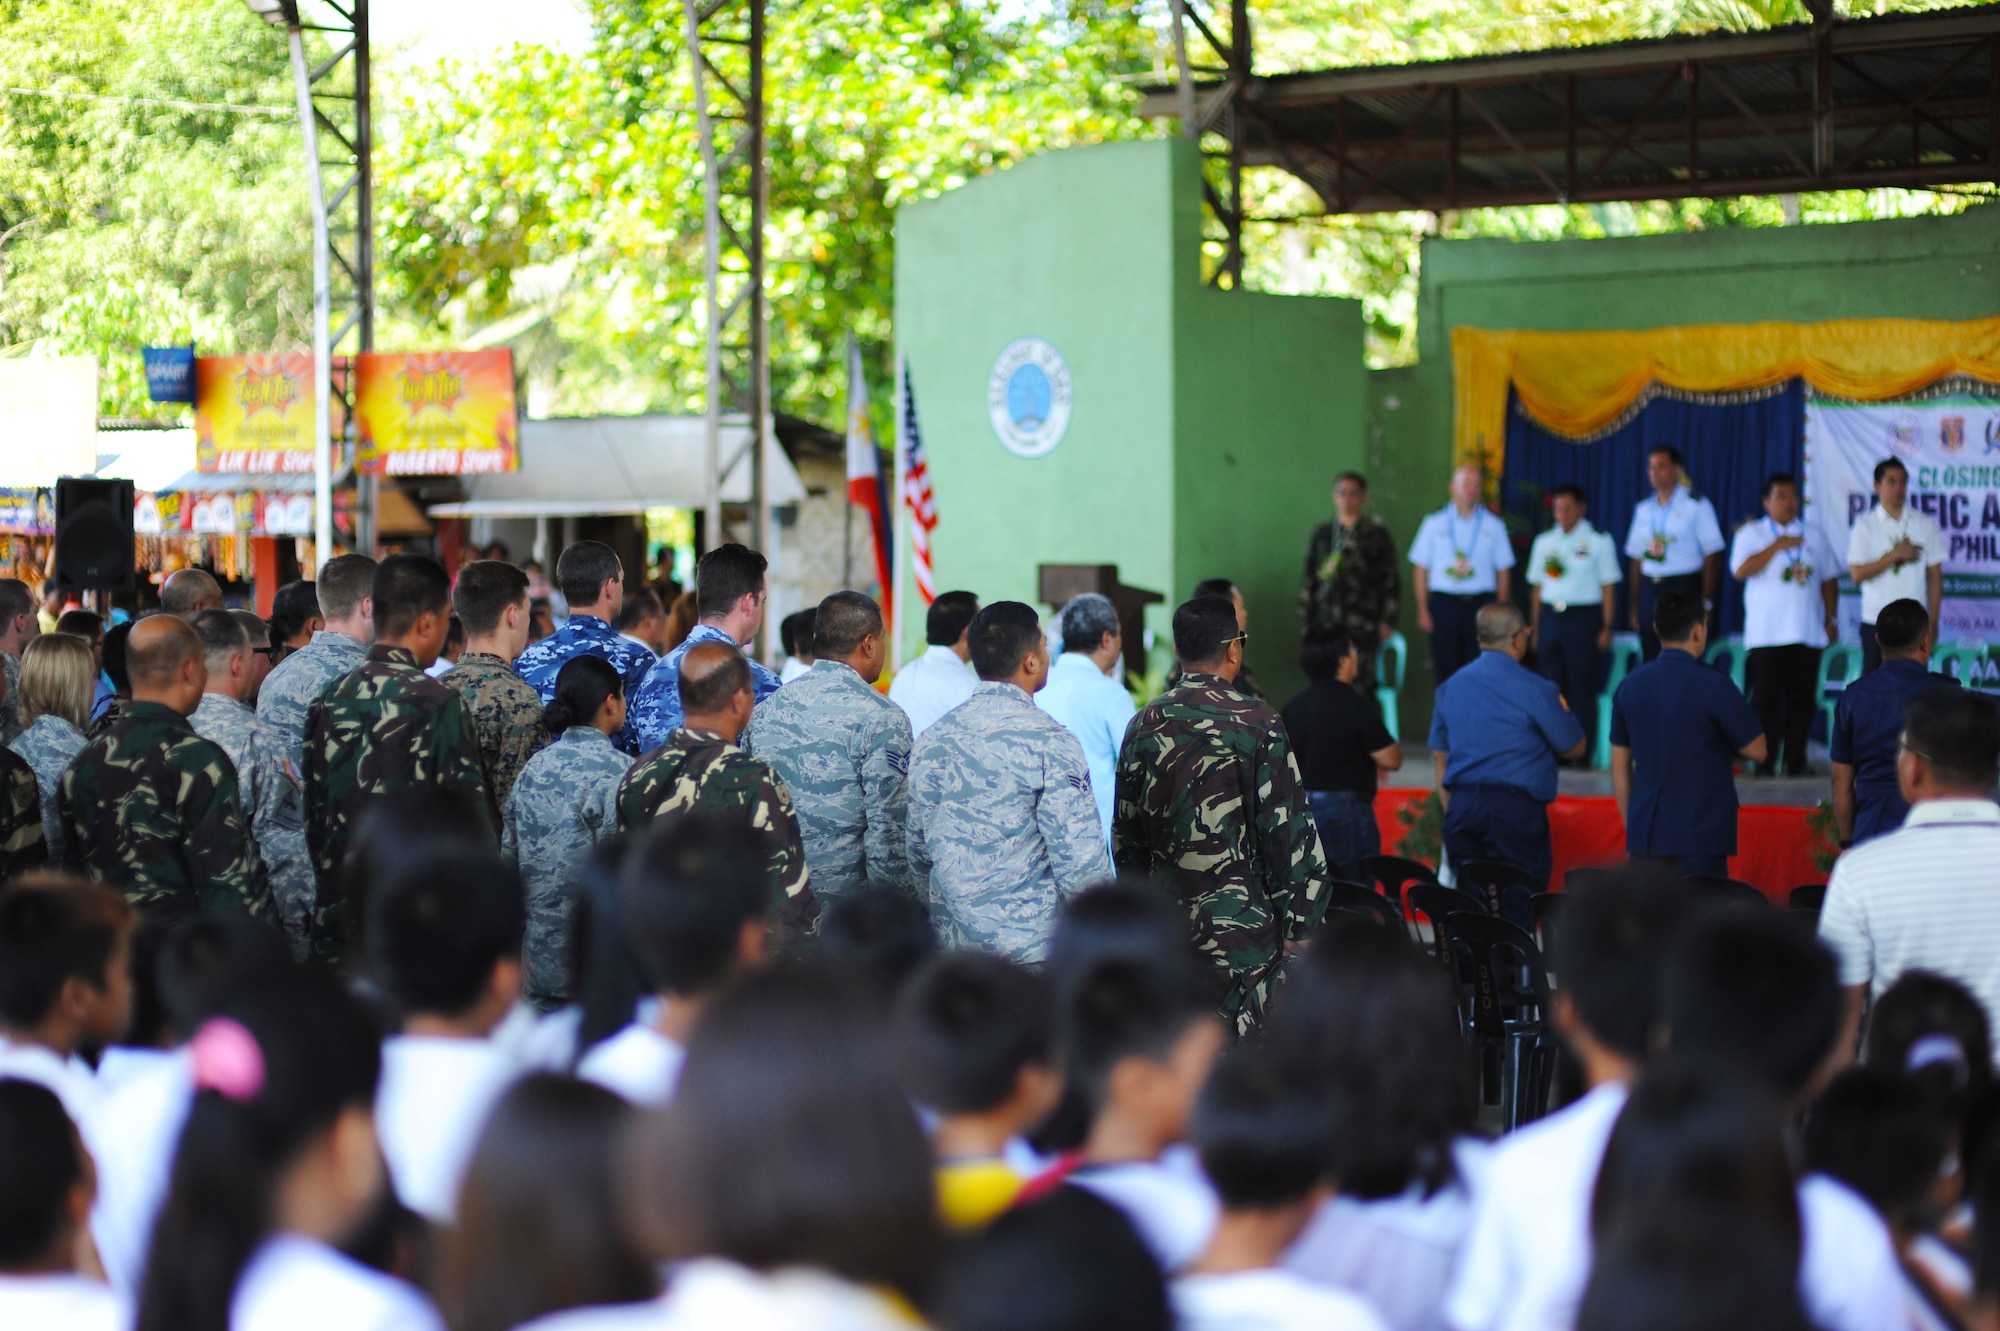 Attendees of the closing ceremony of Pacific Angel Philippines 15-1 stand during the playing of the Bohol hymn at Dao Elementary School, Bohol province, Philippines, Aug. 24, 2015. Over the course of six days, 5,101 patients received health care and six different schools were refurbished providing rehabilitated learning space to approximately 5,000 students. Efforts undertaken during Pacific Angel help multilateral militaries in the Pacific improve and build relationships across a wide spectrum of civic operations, which bolsters each nation’s capacity to respond and support future humanitarian assistance and disaster relief operations. (U.S. Air Force photo by Tech. Sgt. Aaron Oelrich/Released)